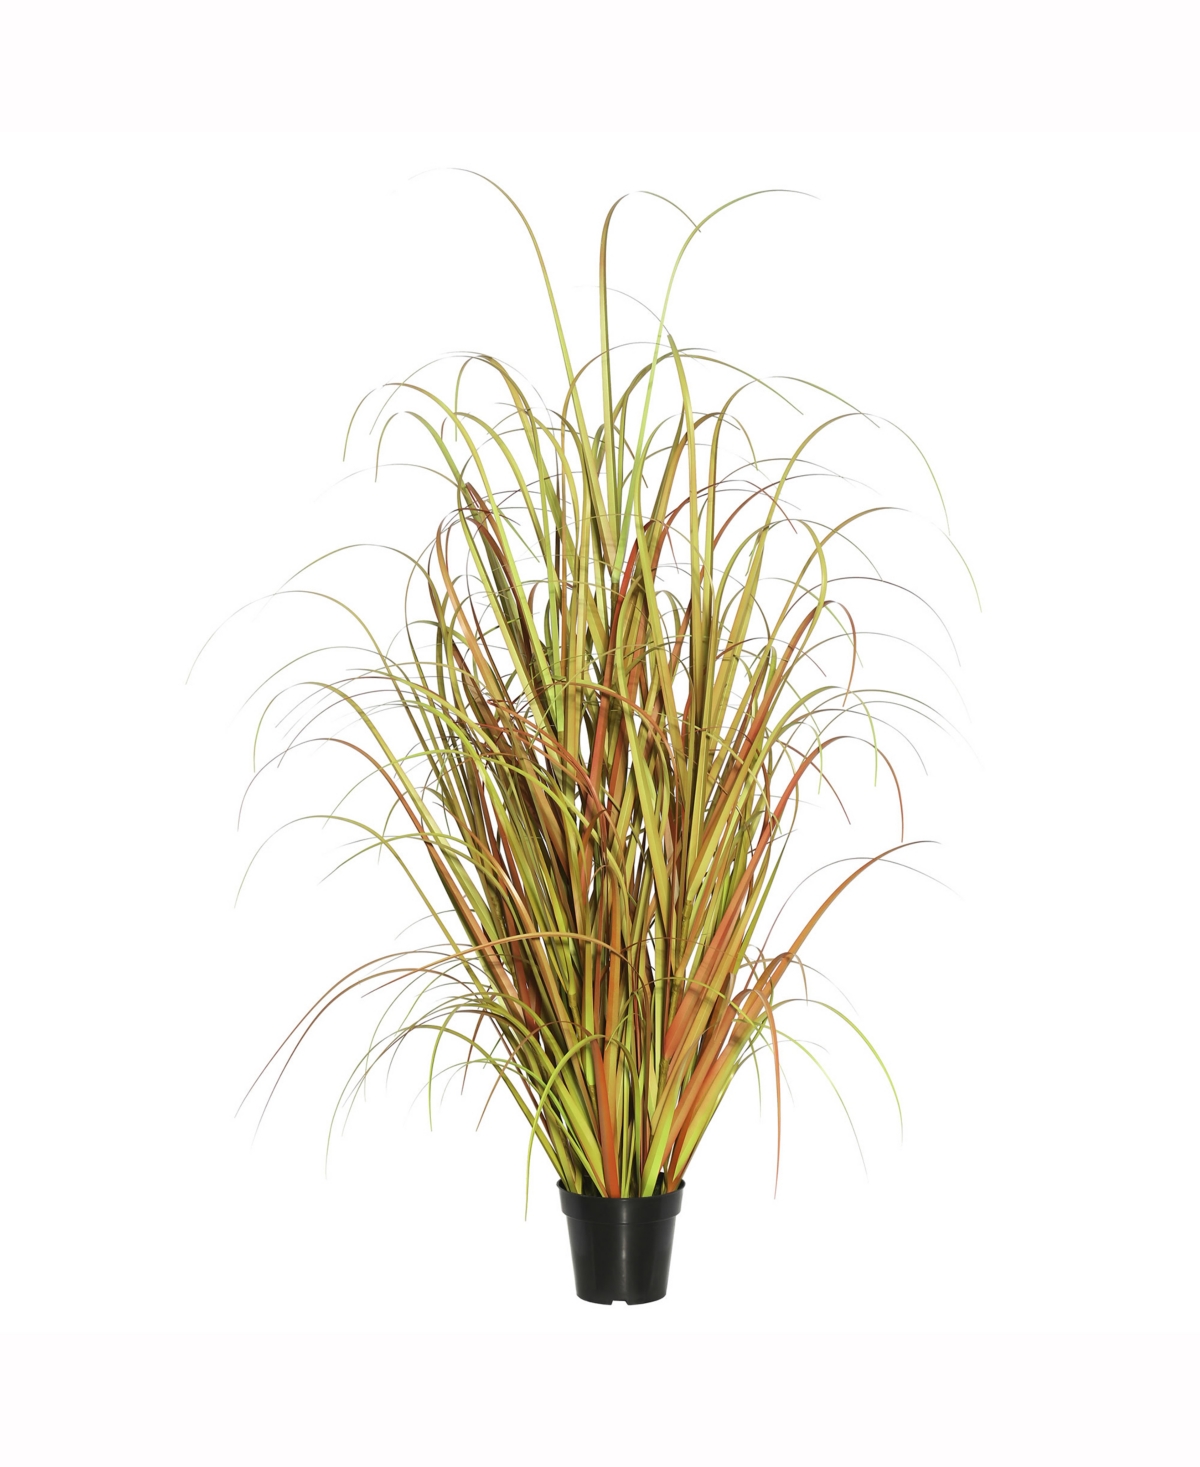 24" Pvc Artificial Potted Mixed Brown Grass X 140